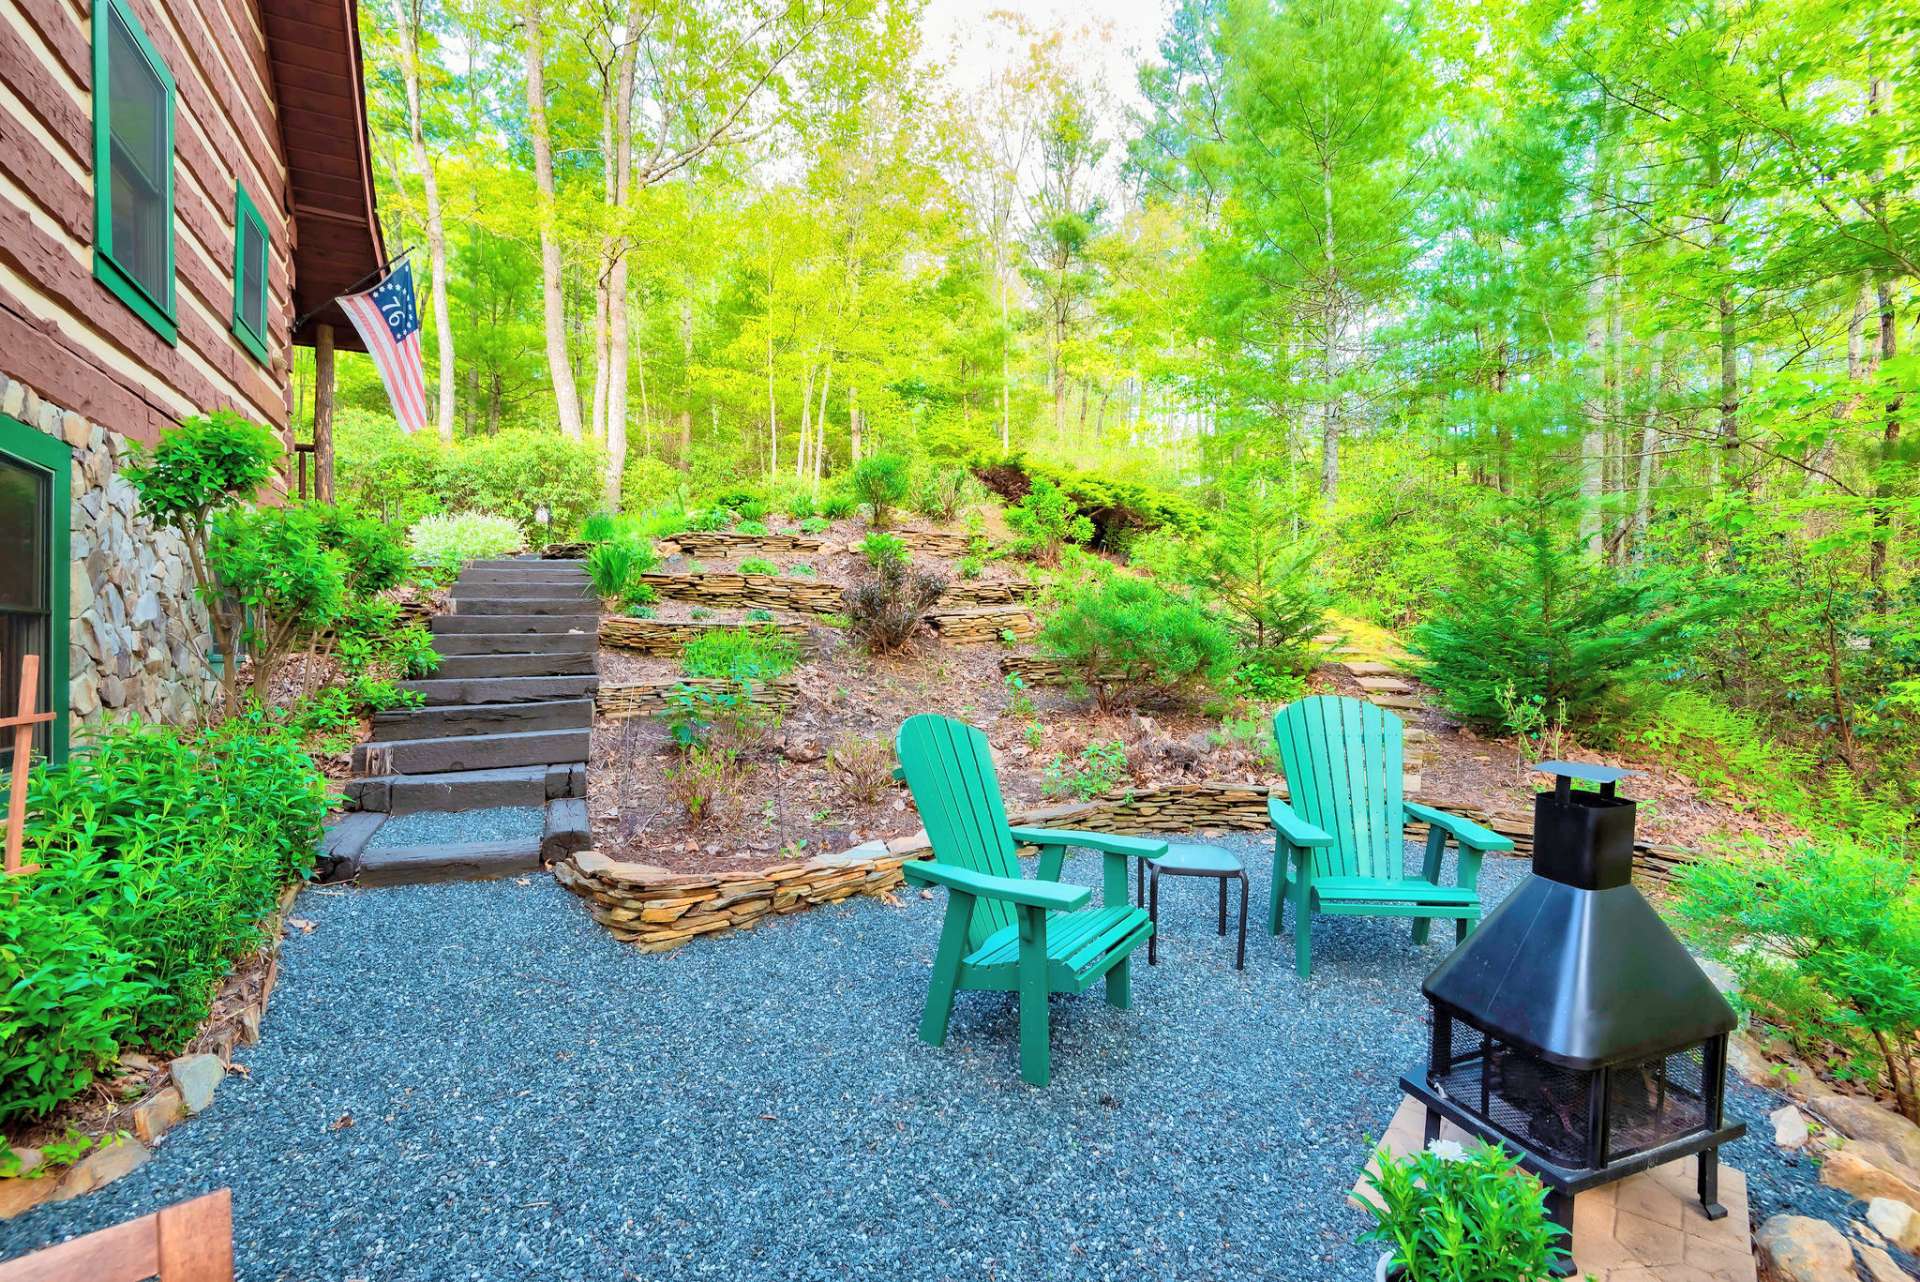 This wonderful outdoor space provides additional memory making opportunities.